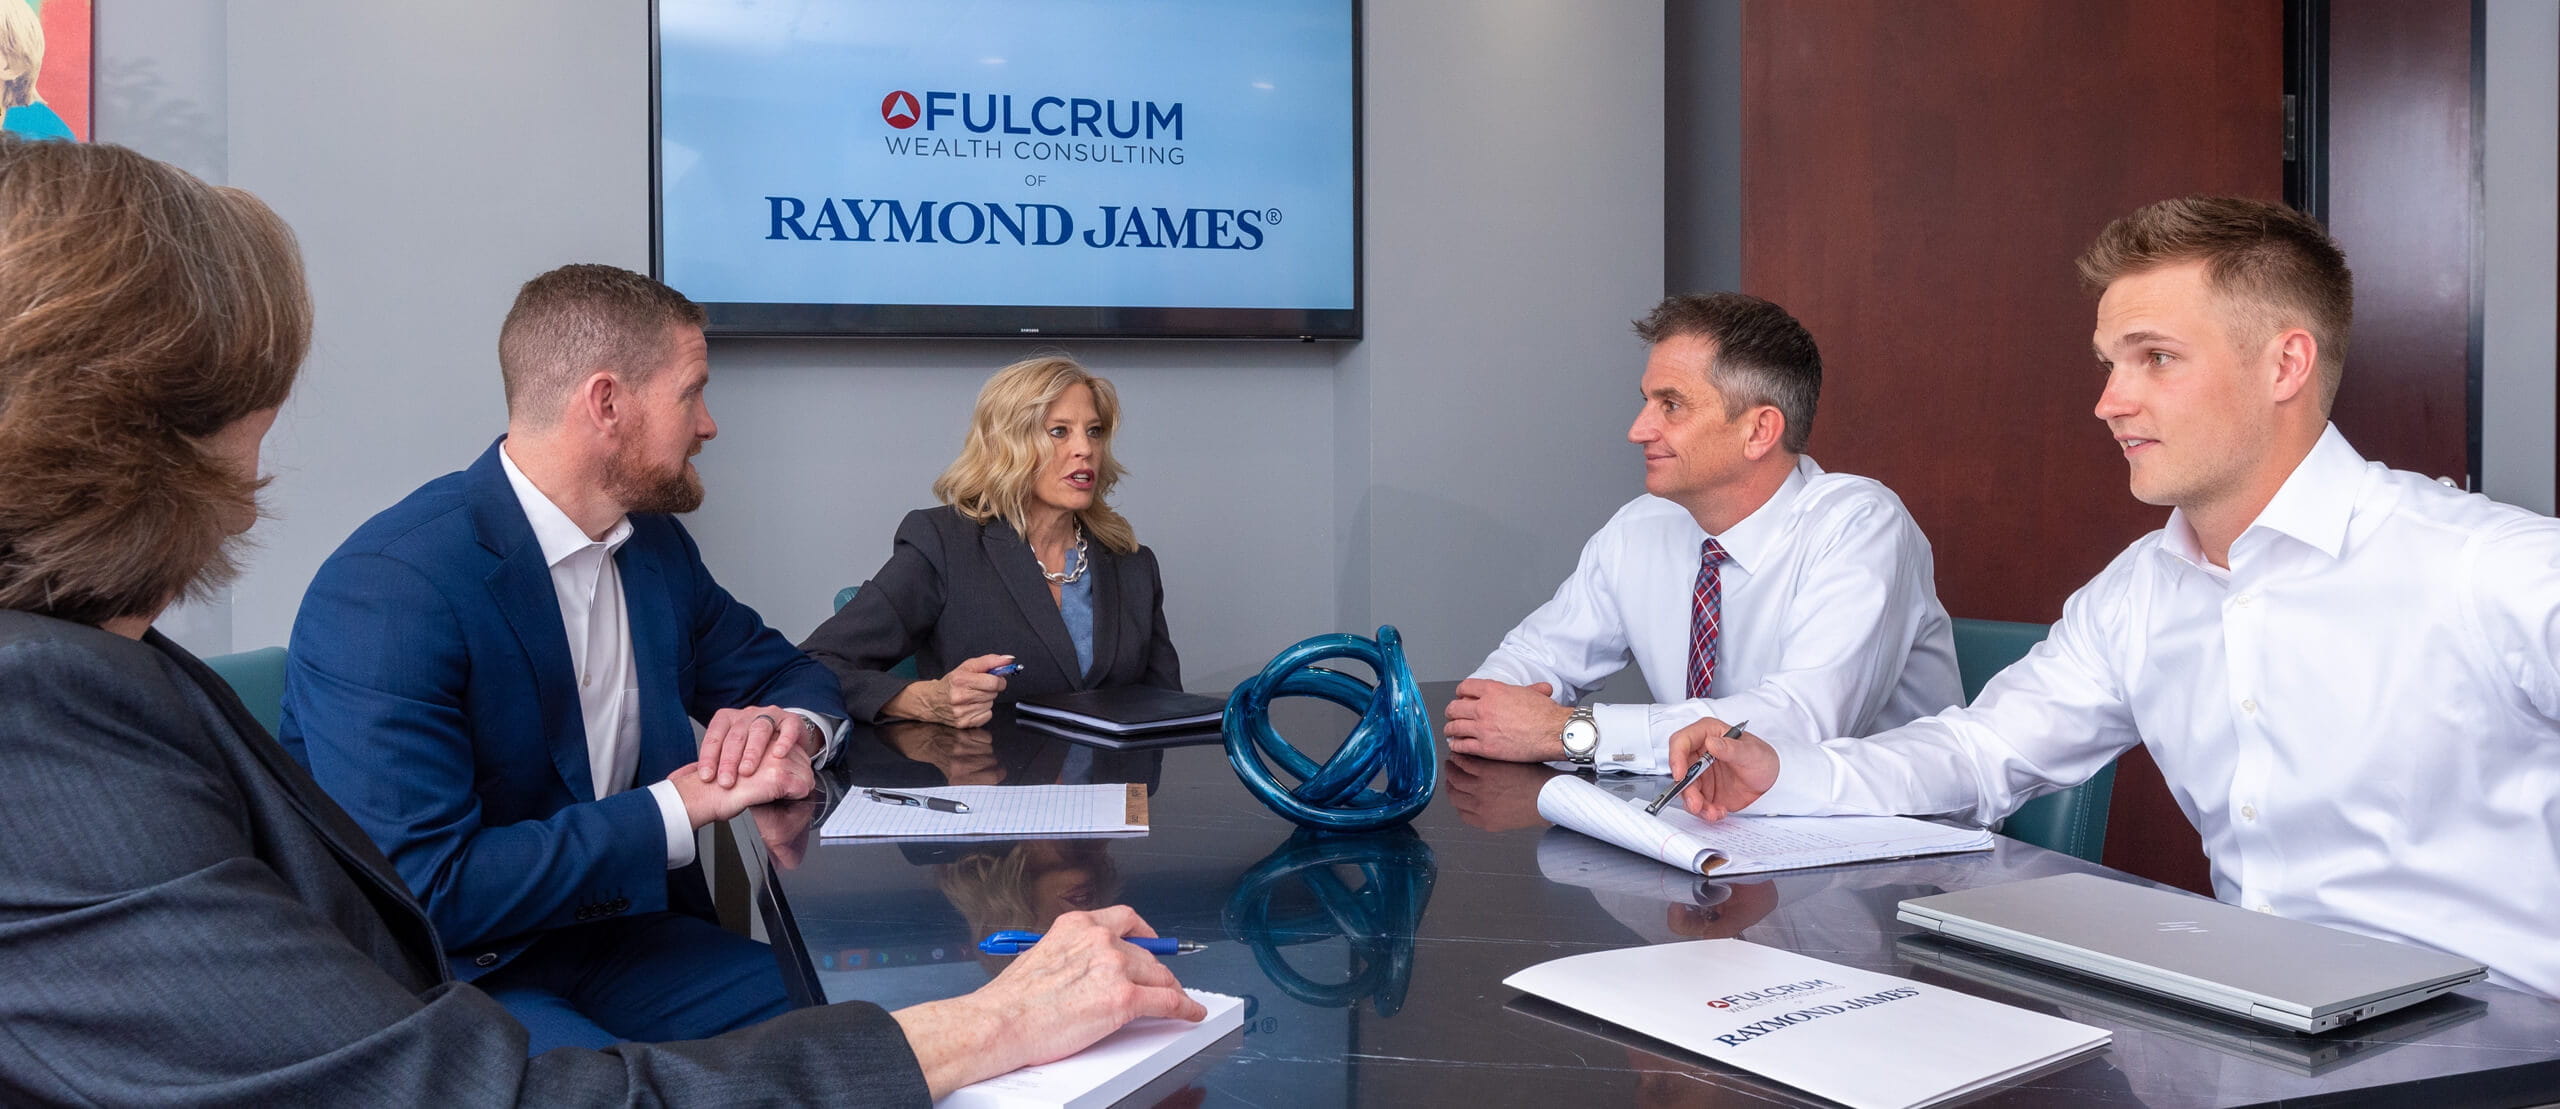 Fulcrum Wealth Consulting of Raymond James Group Photo